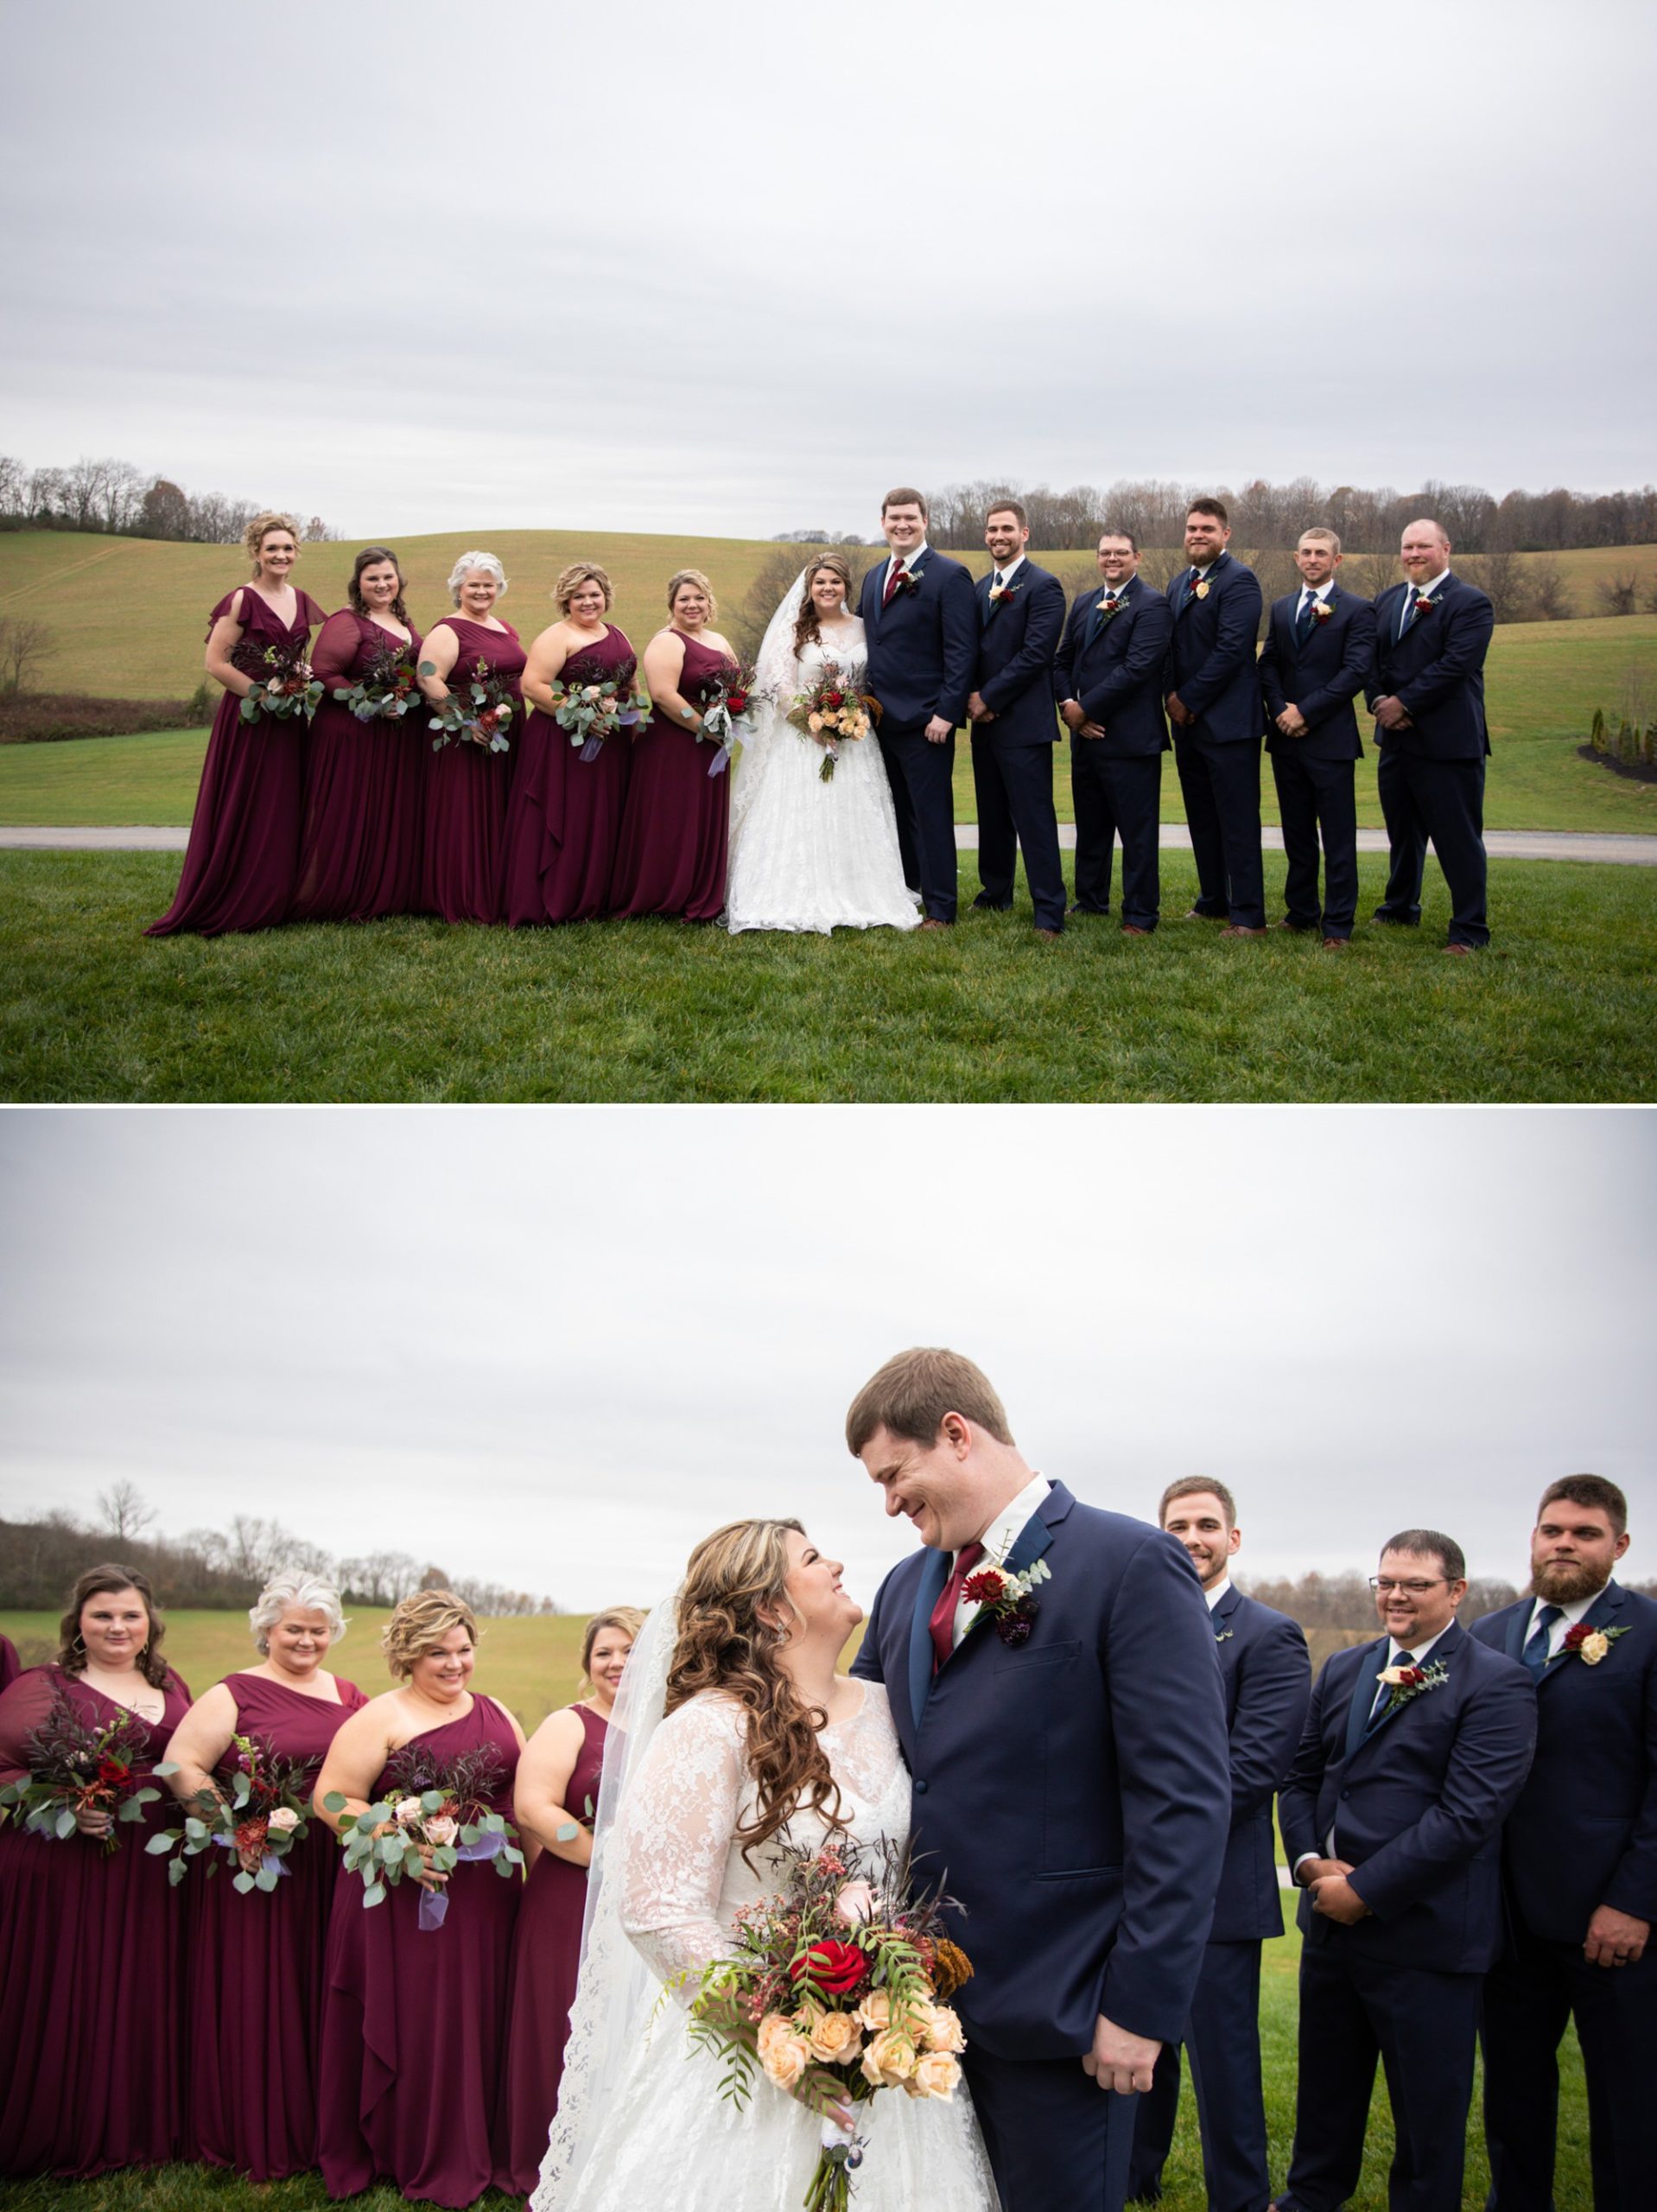 Bridal party with bride and groom before wedding at White Dove Barn outdoor barn wedding venue outside of Nashville TN